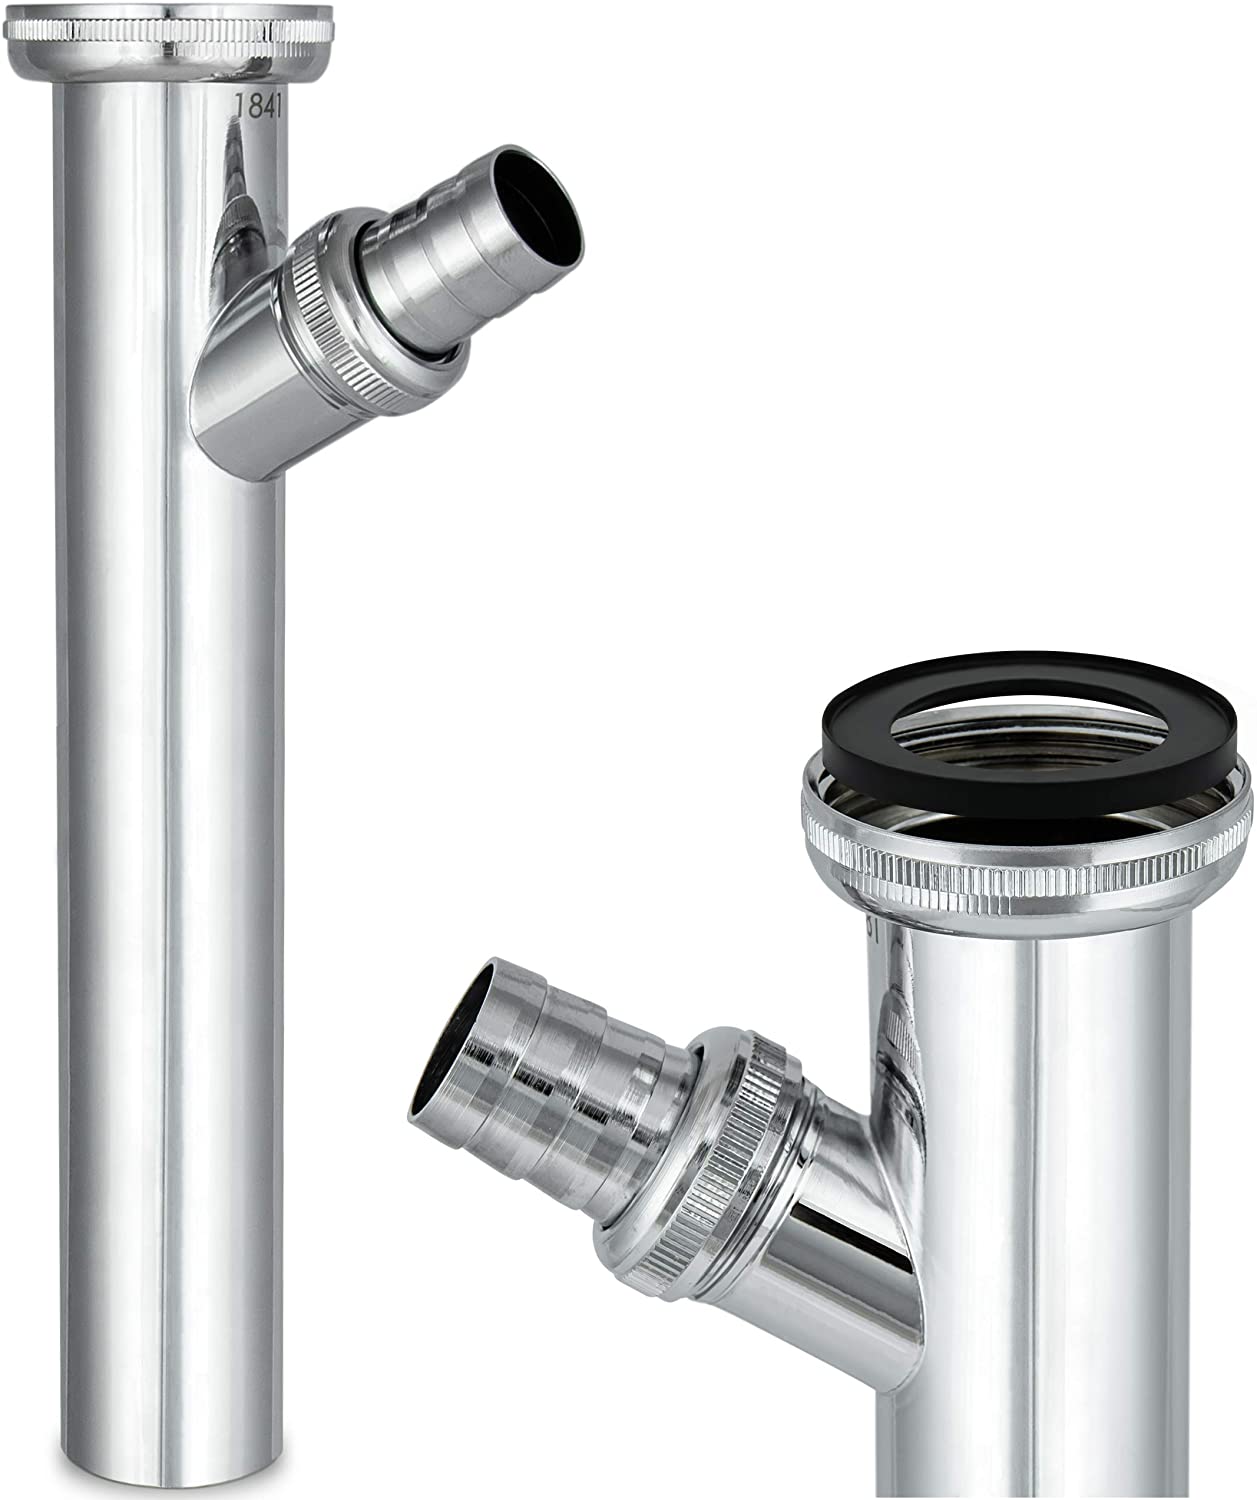 Siphonly Adjustable pipe 1 1/4 inch, diameter 32 mm, siphon extension for sink drain fittings, siphon extension with drain connection, made of high-quality chrome-plated brass, length 200 mm